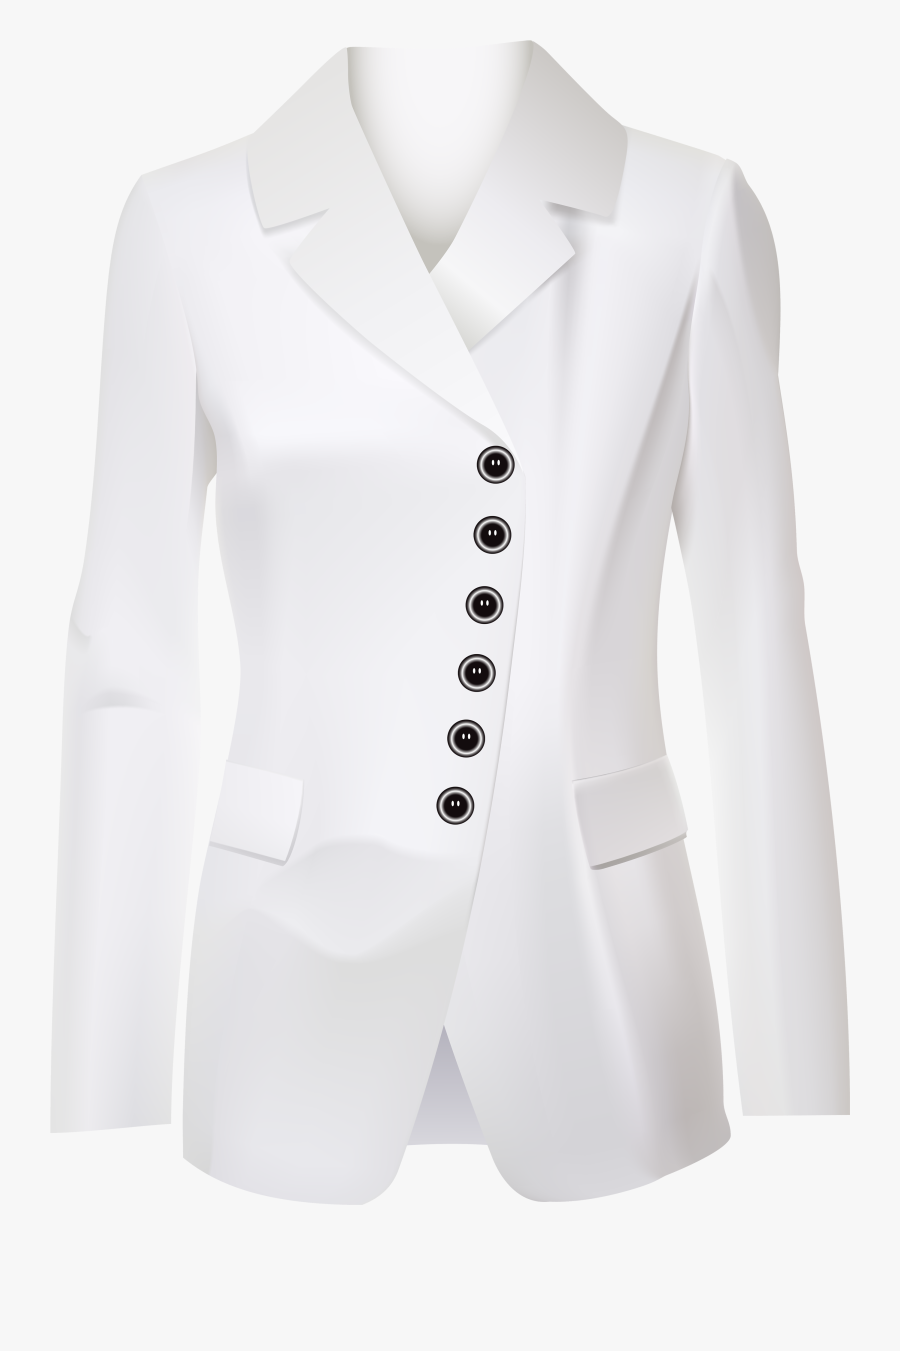 Female White Jacket Png Clipart - Formal Wear, Transparent Clipart